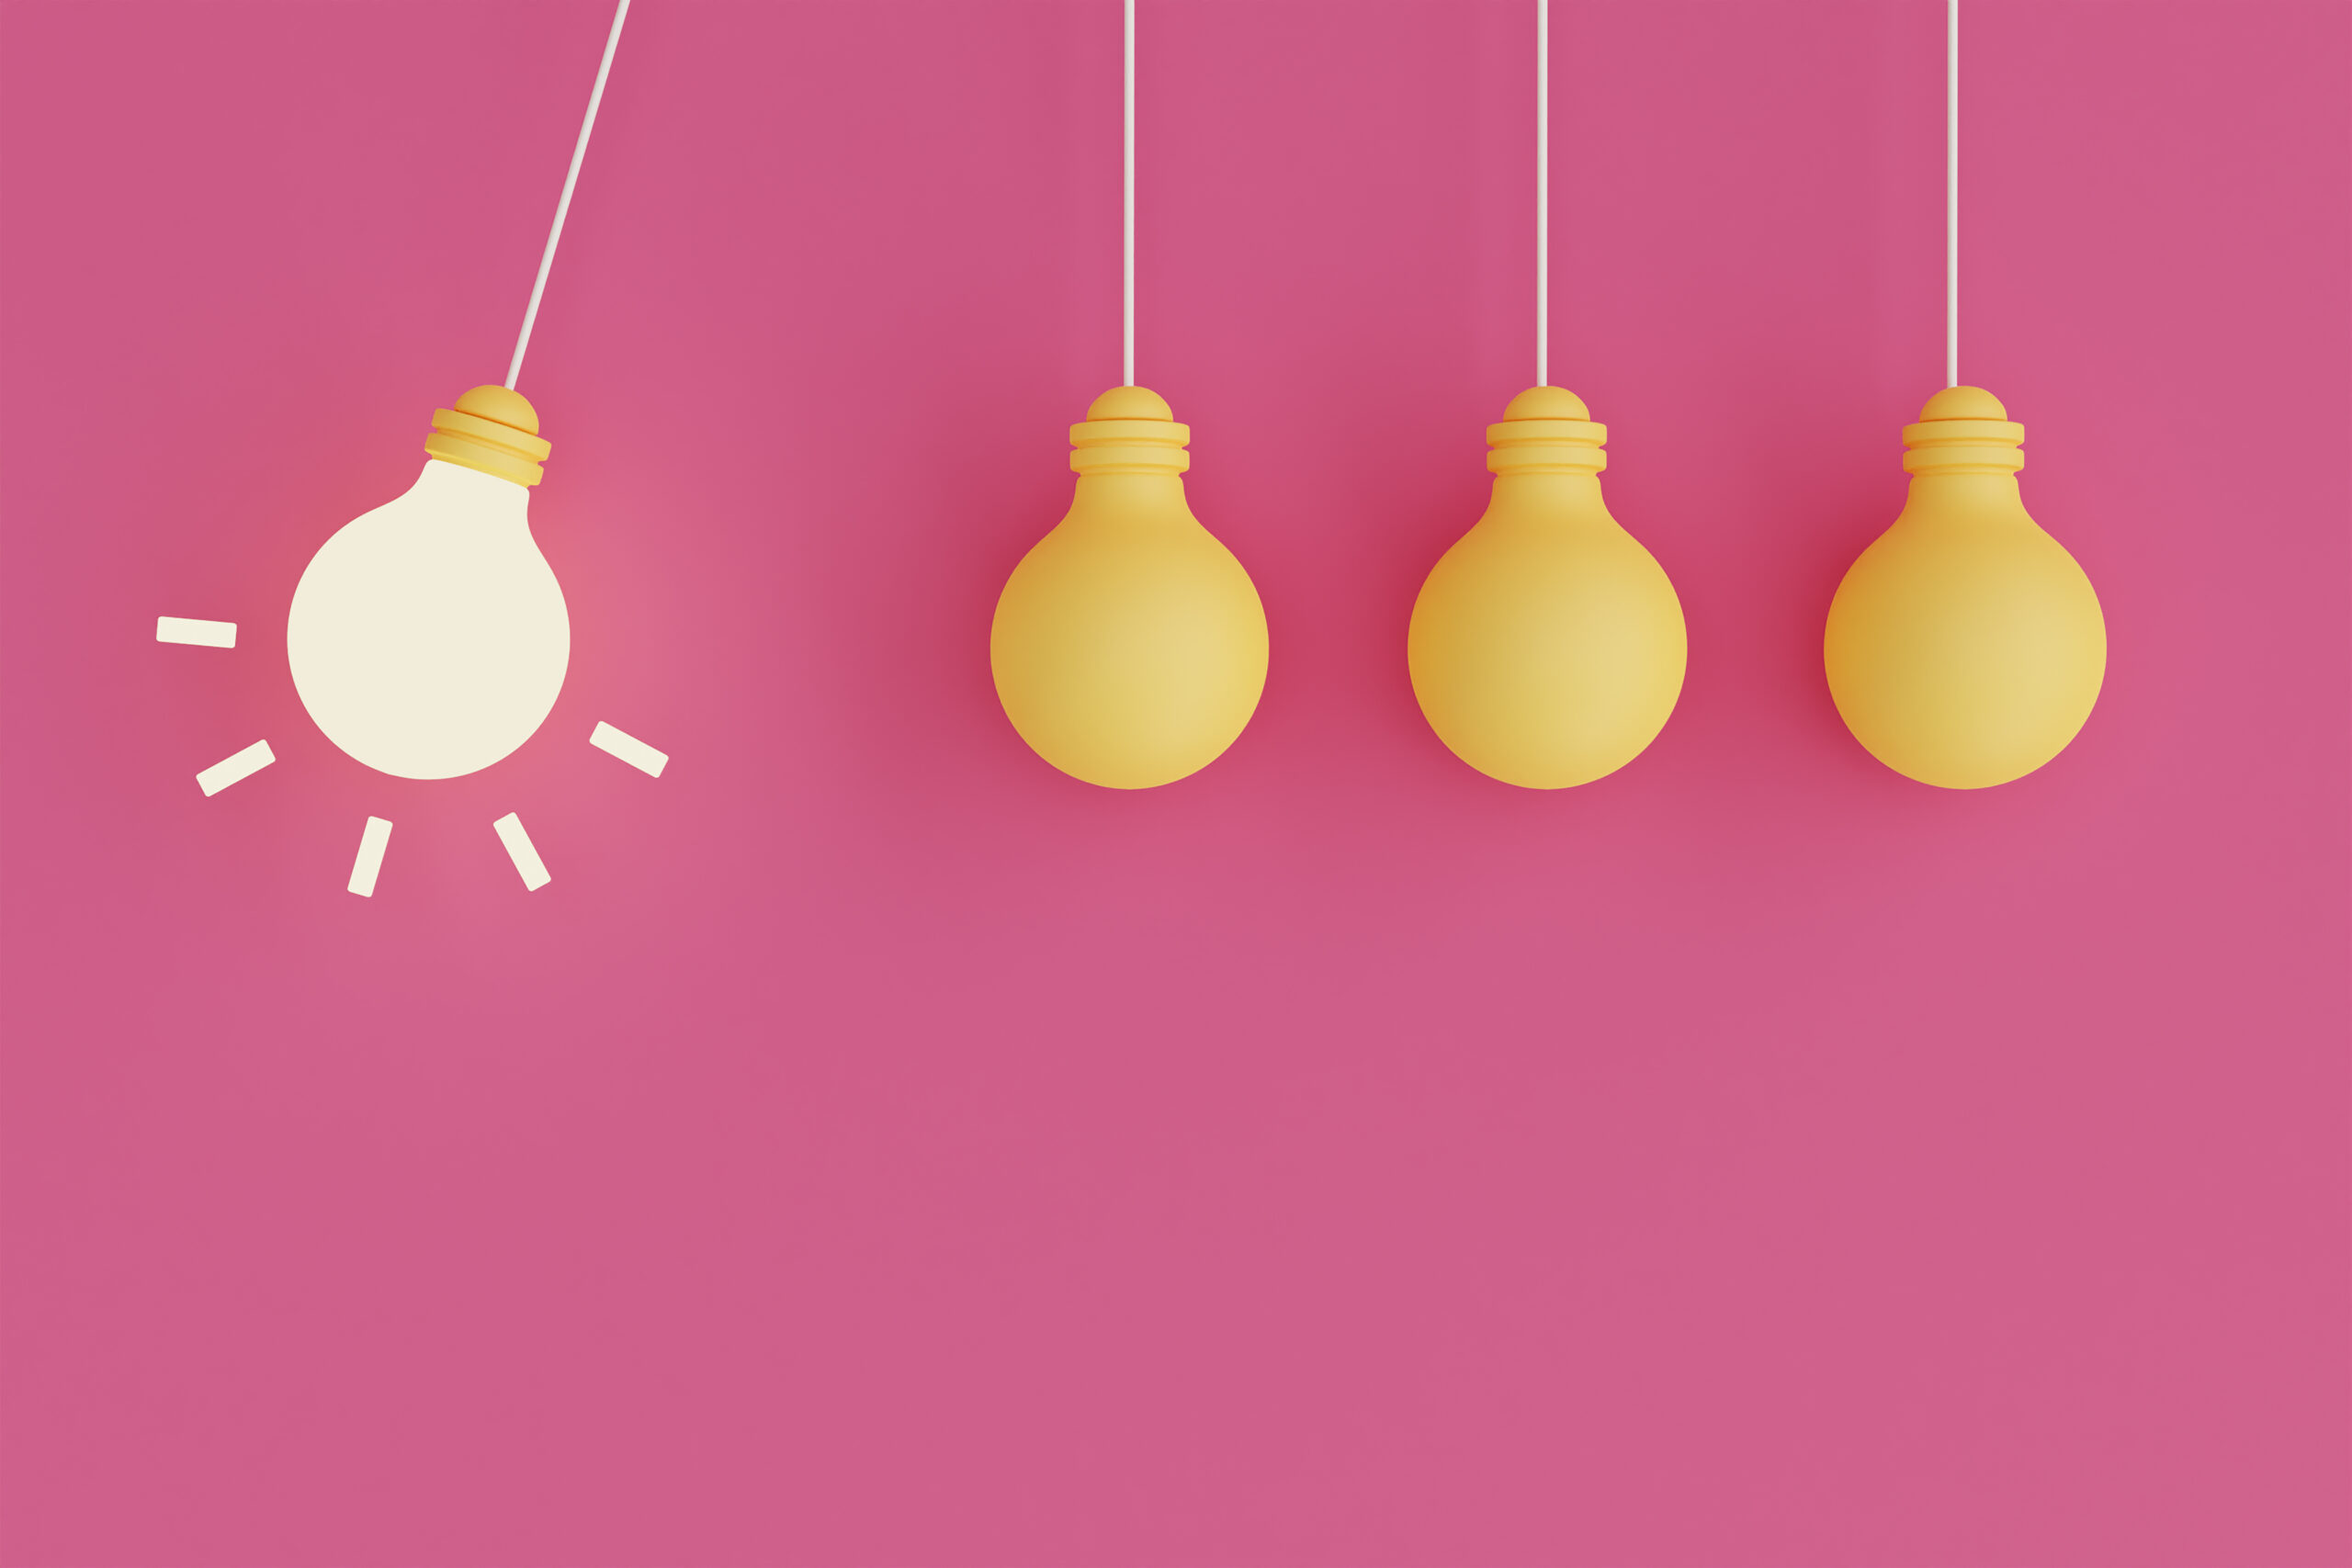 Four lightbulbs pictured in front of a dark pink background. One of them is lit.